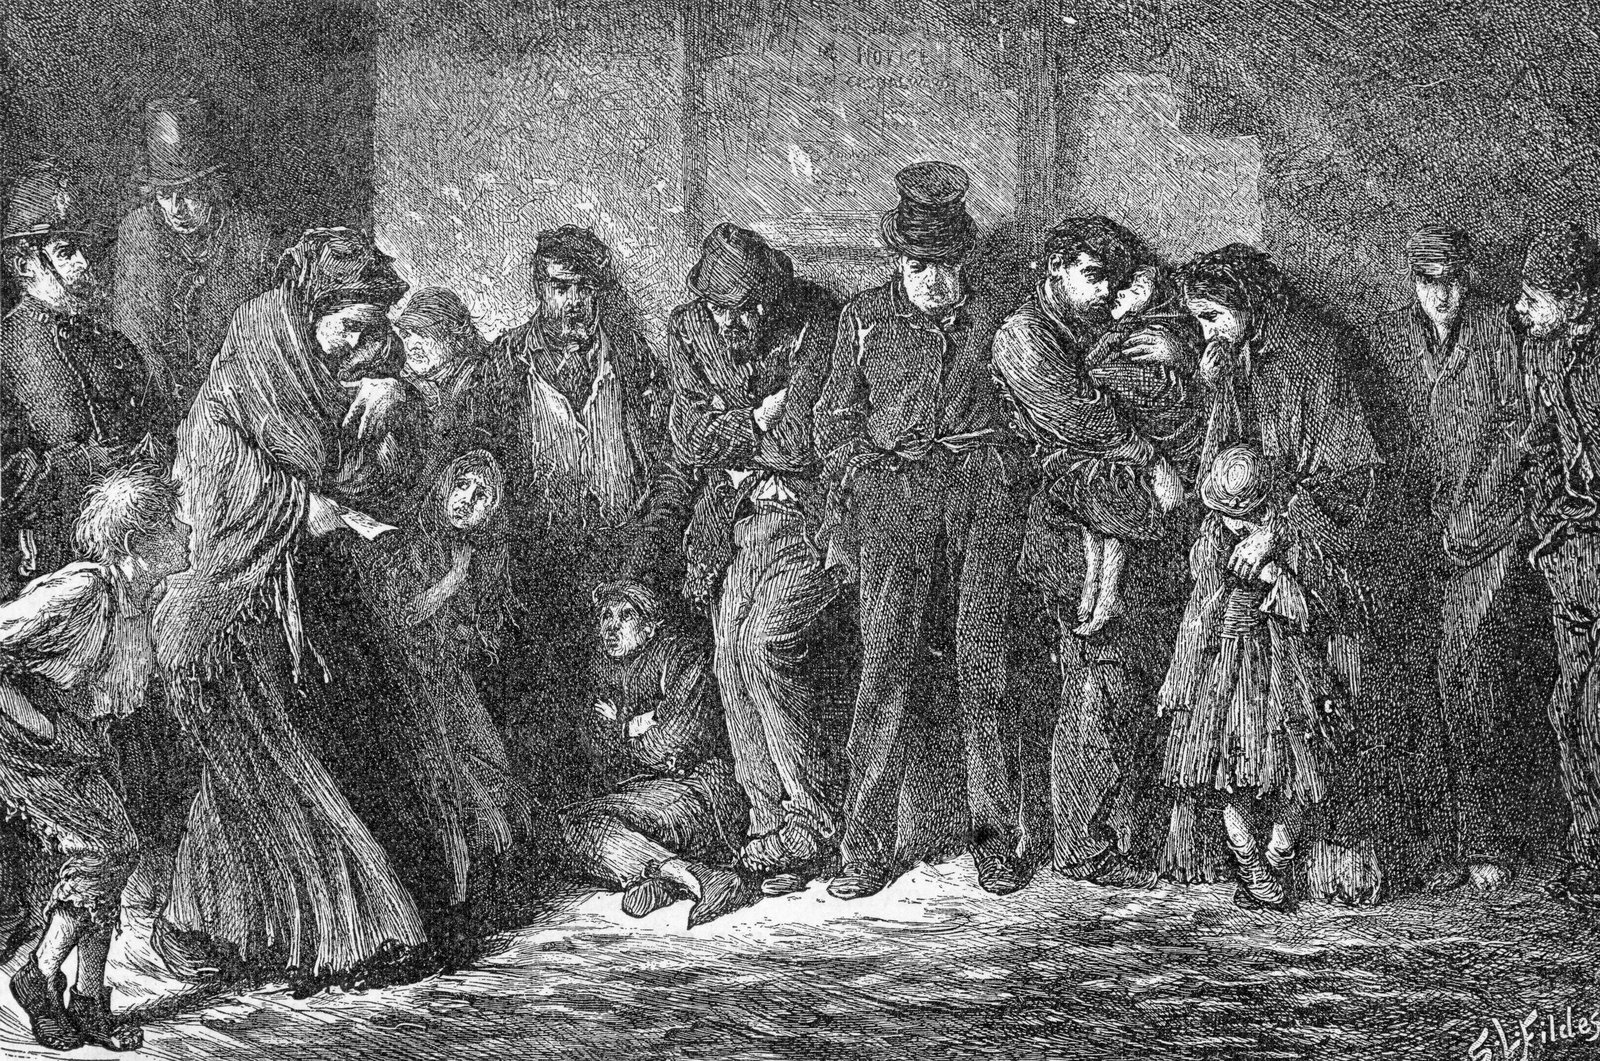 Image - "Houseless and Hungry" by Luke Fildes,which appeared in the first number of the London Graphic, 1869. Source: DeAgostini/Getty Images